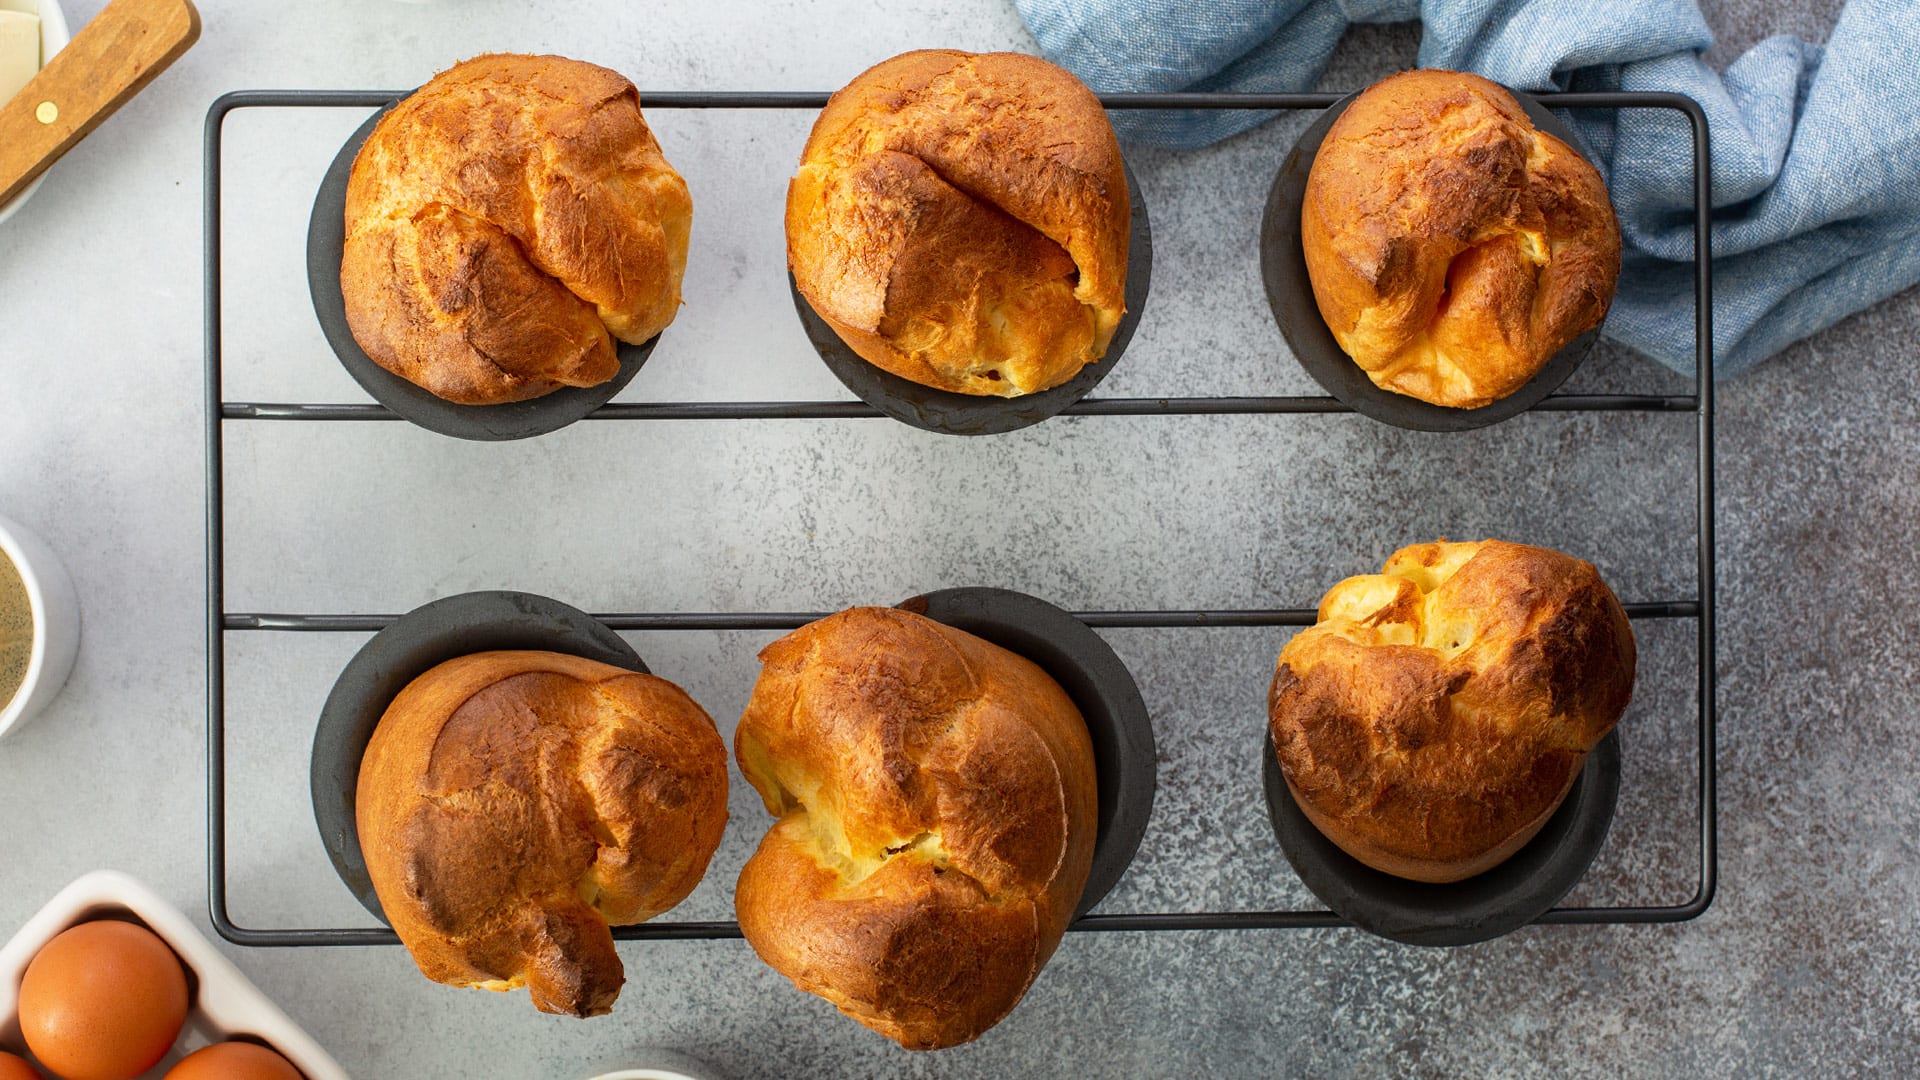 Muffin Pan Popovers - Just a Taste